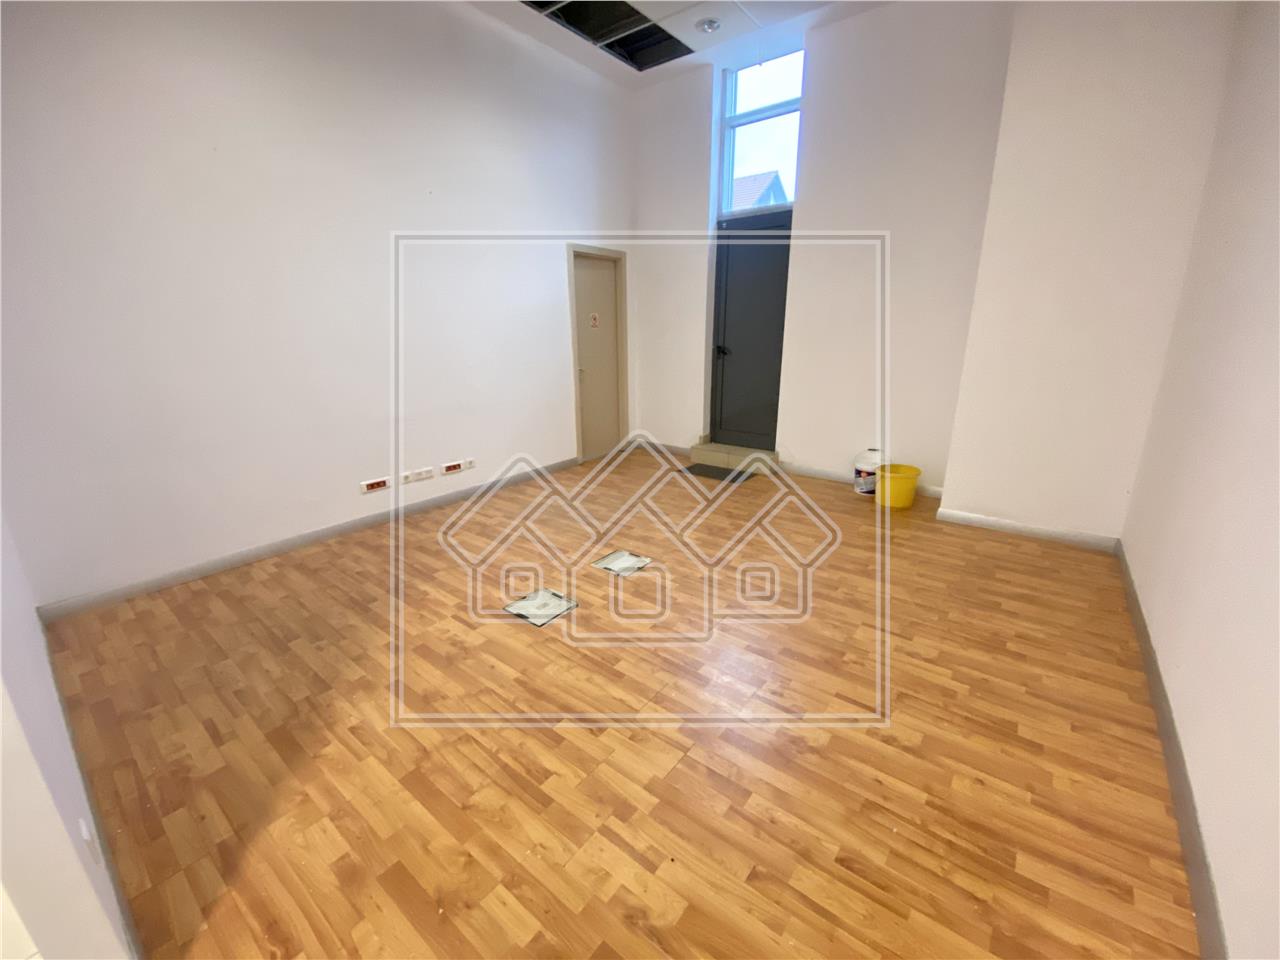 Office space for rent in Sibiu - Business Center area